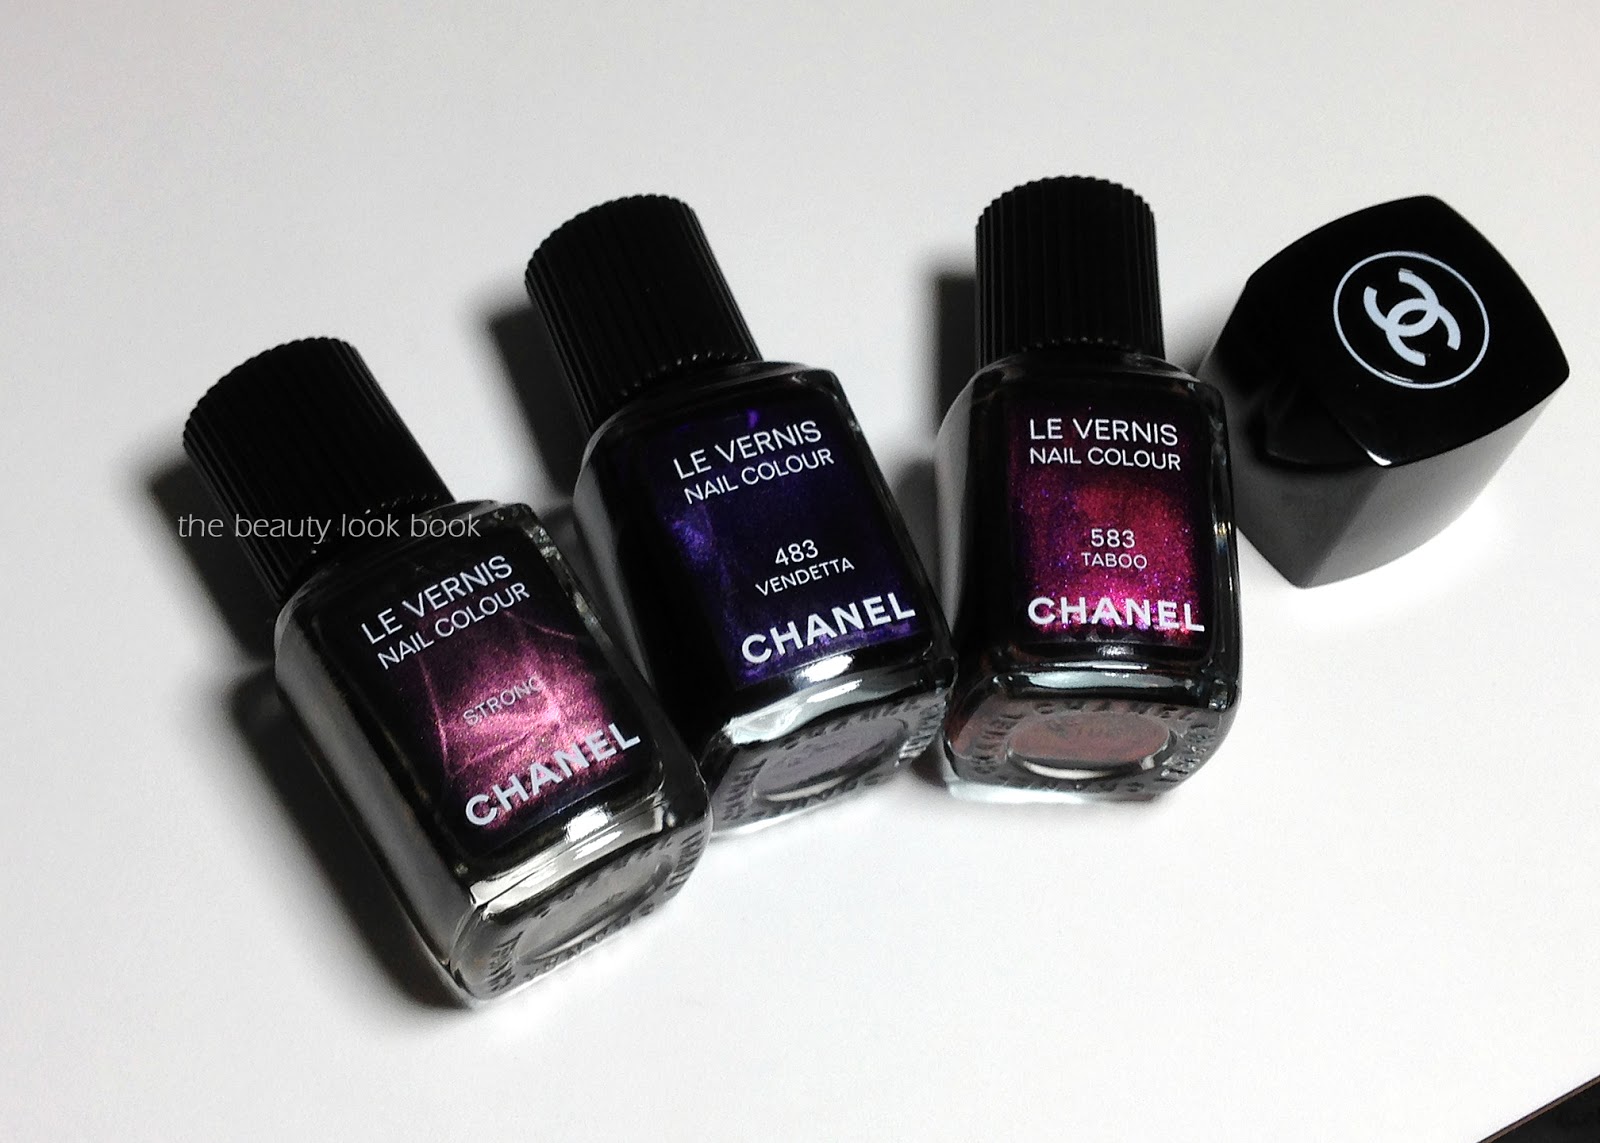 Nail Polish Archives - Page 24 of 55 - The Beauty Look Book